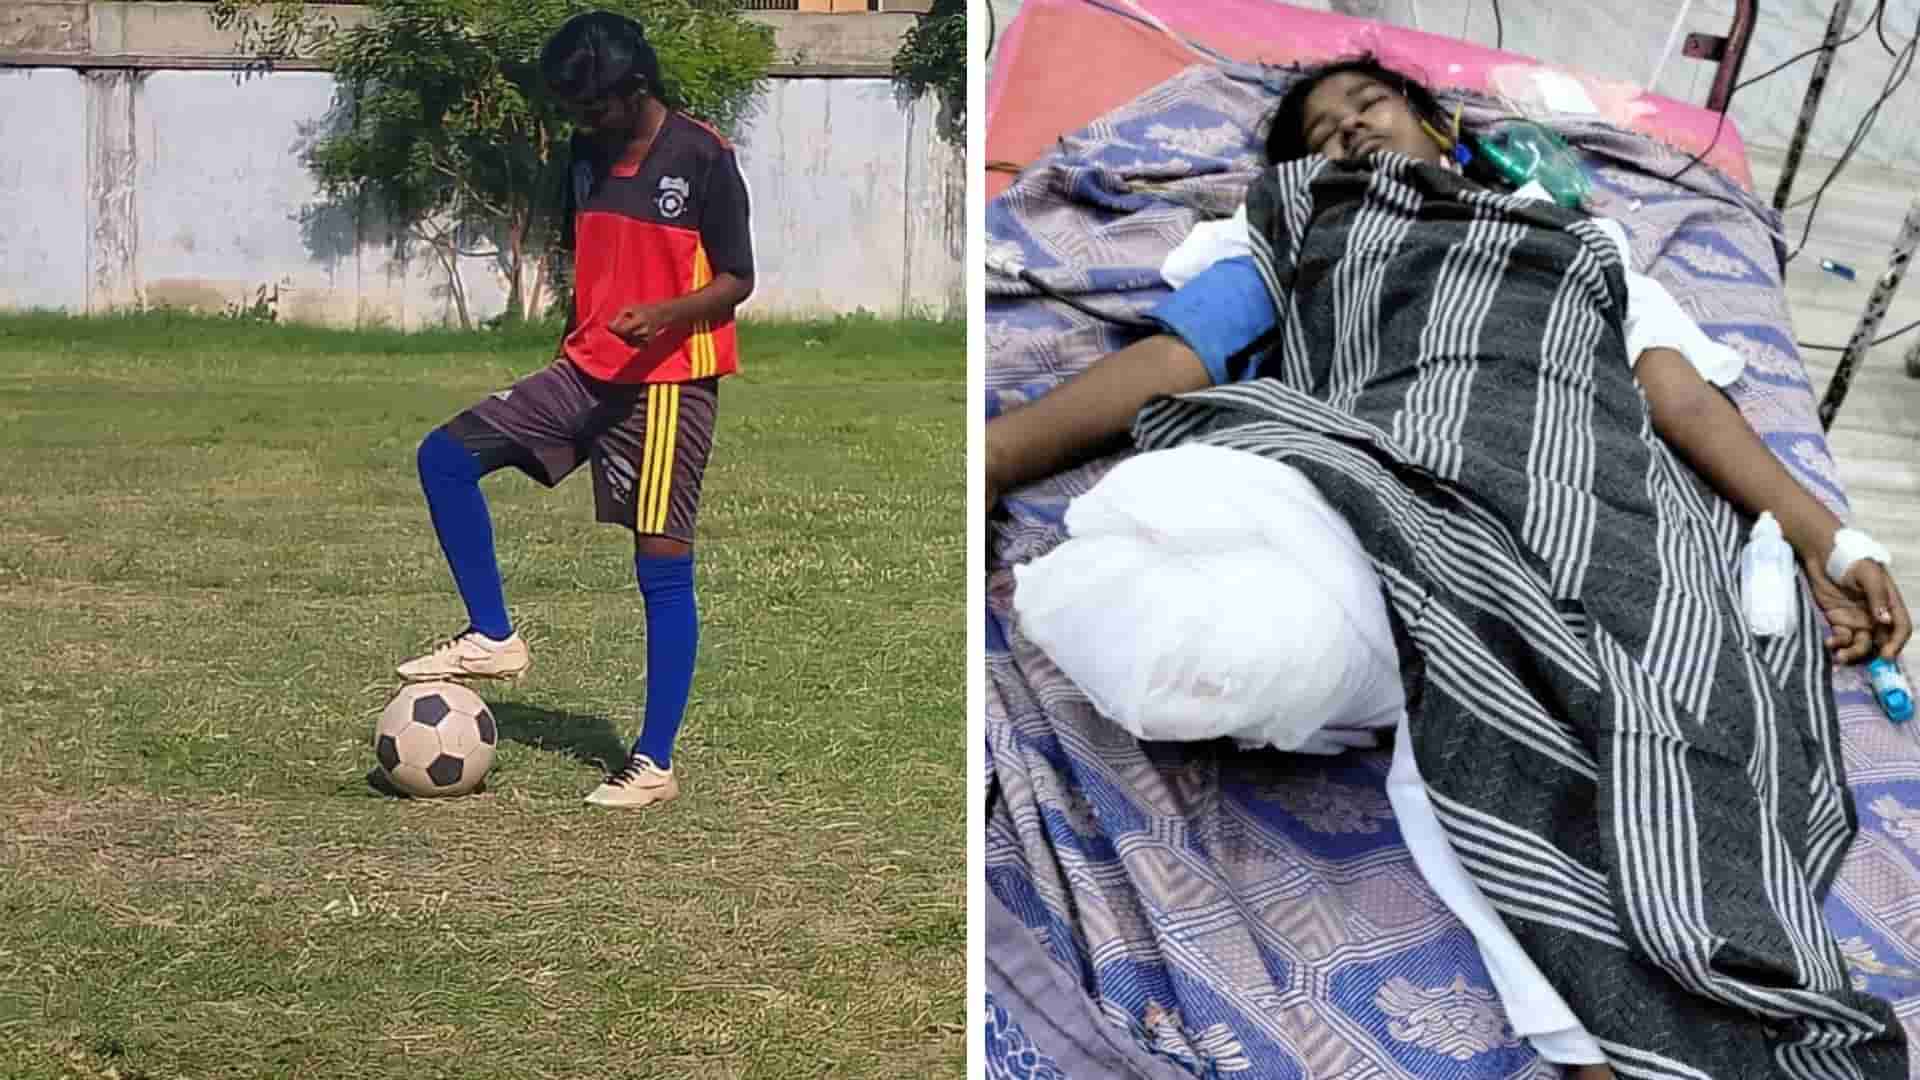 Priya’s death: 6 Months On, Football Player's Family Awaits Justice